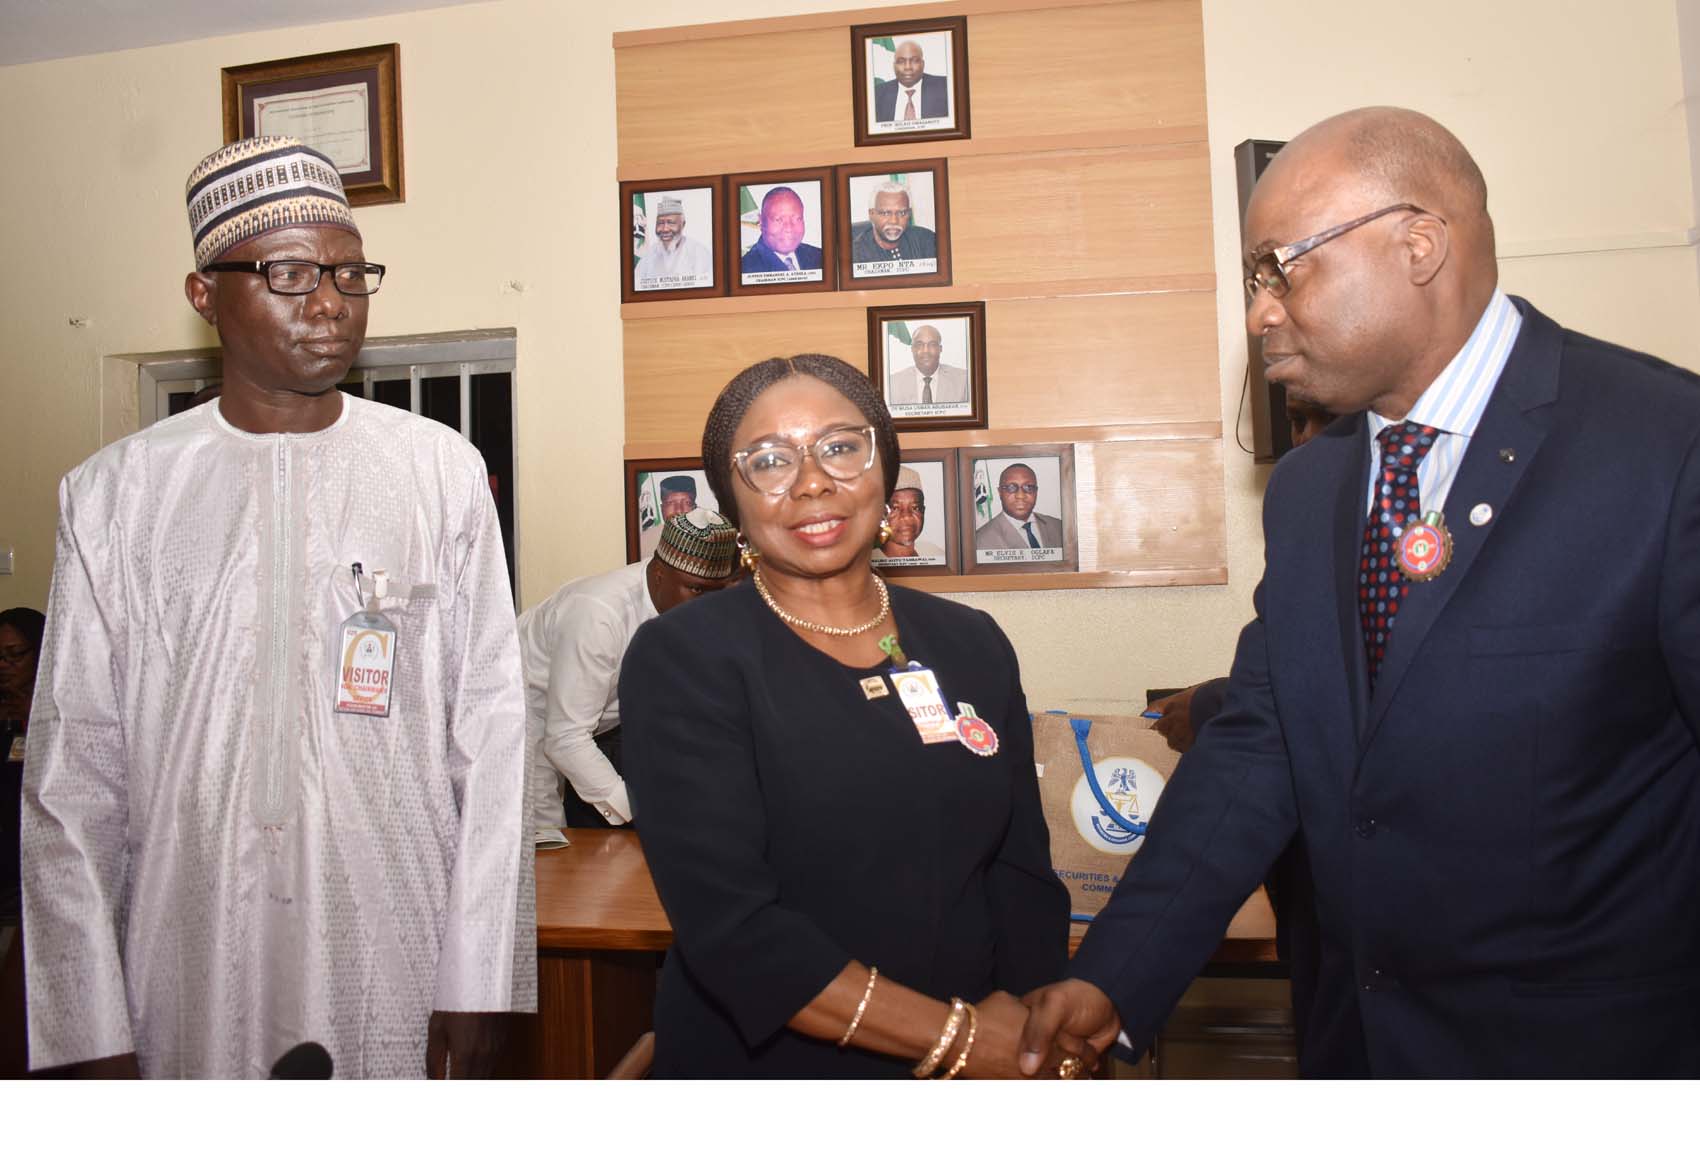 SEC and ICPC, 1A,2,1B  , 1C L-R,  Acting Executive Commissioner,  Operations, Securities and Exchange Commission Mr Isyaku Tilde, Acting Director General SEC  Ms Mary Uduk and  Chairman, Independent Corrupt Practices and other Related Offences Commission Prof Bolaji Owasanoye during a Meeting between SEC and ICPC in Abuja, Wednesday